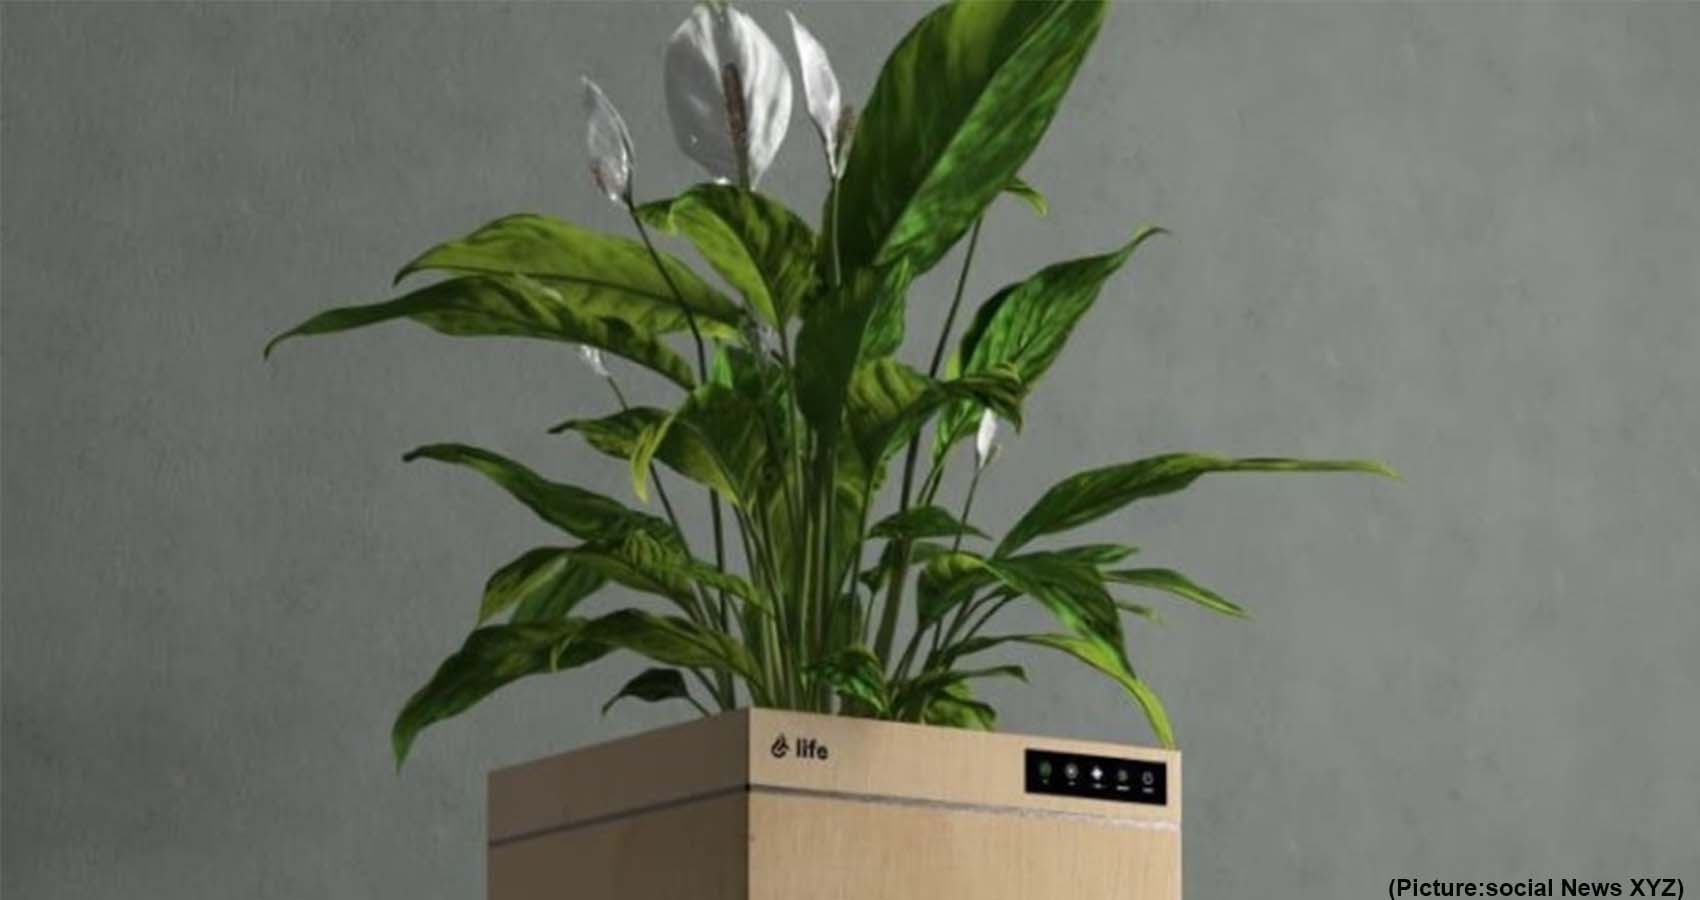 Students From India Develop Plant-Based Air Purifier